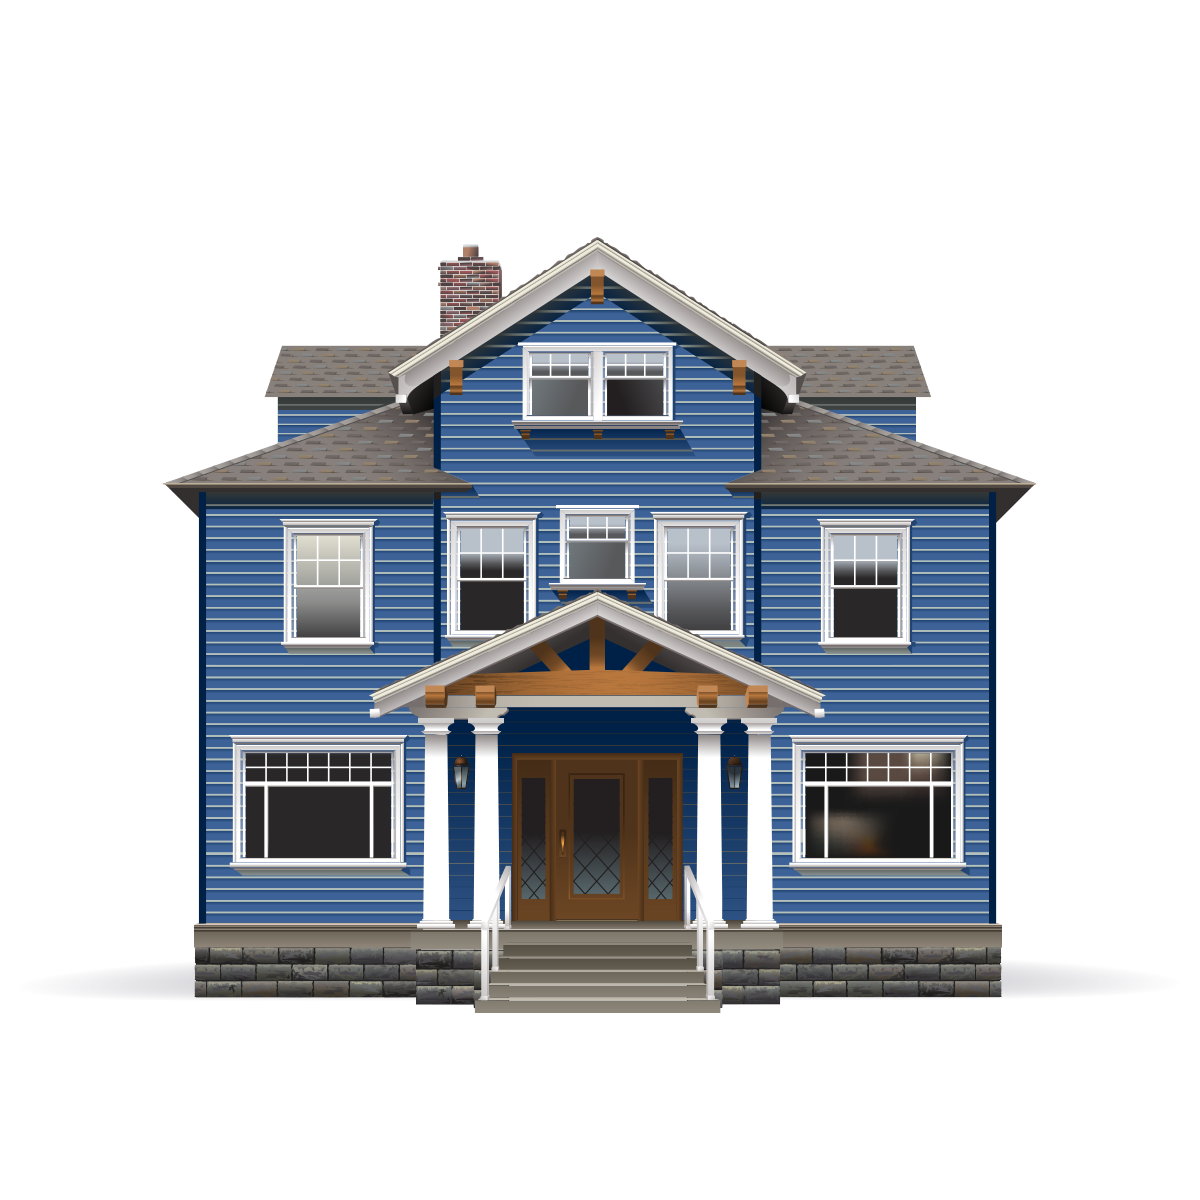 Dark blue bungalow house with grey roof and white trim